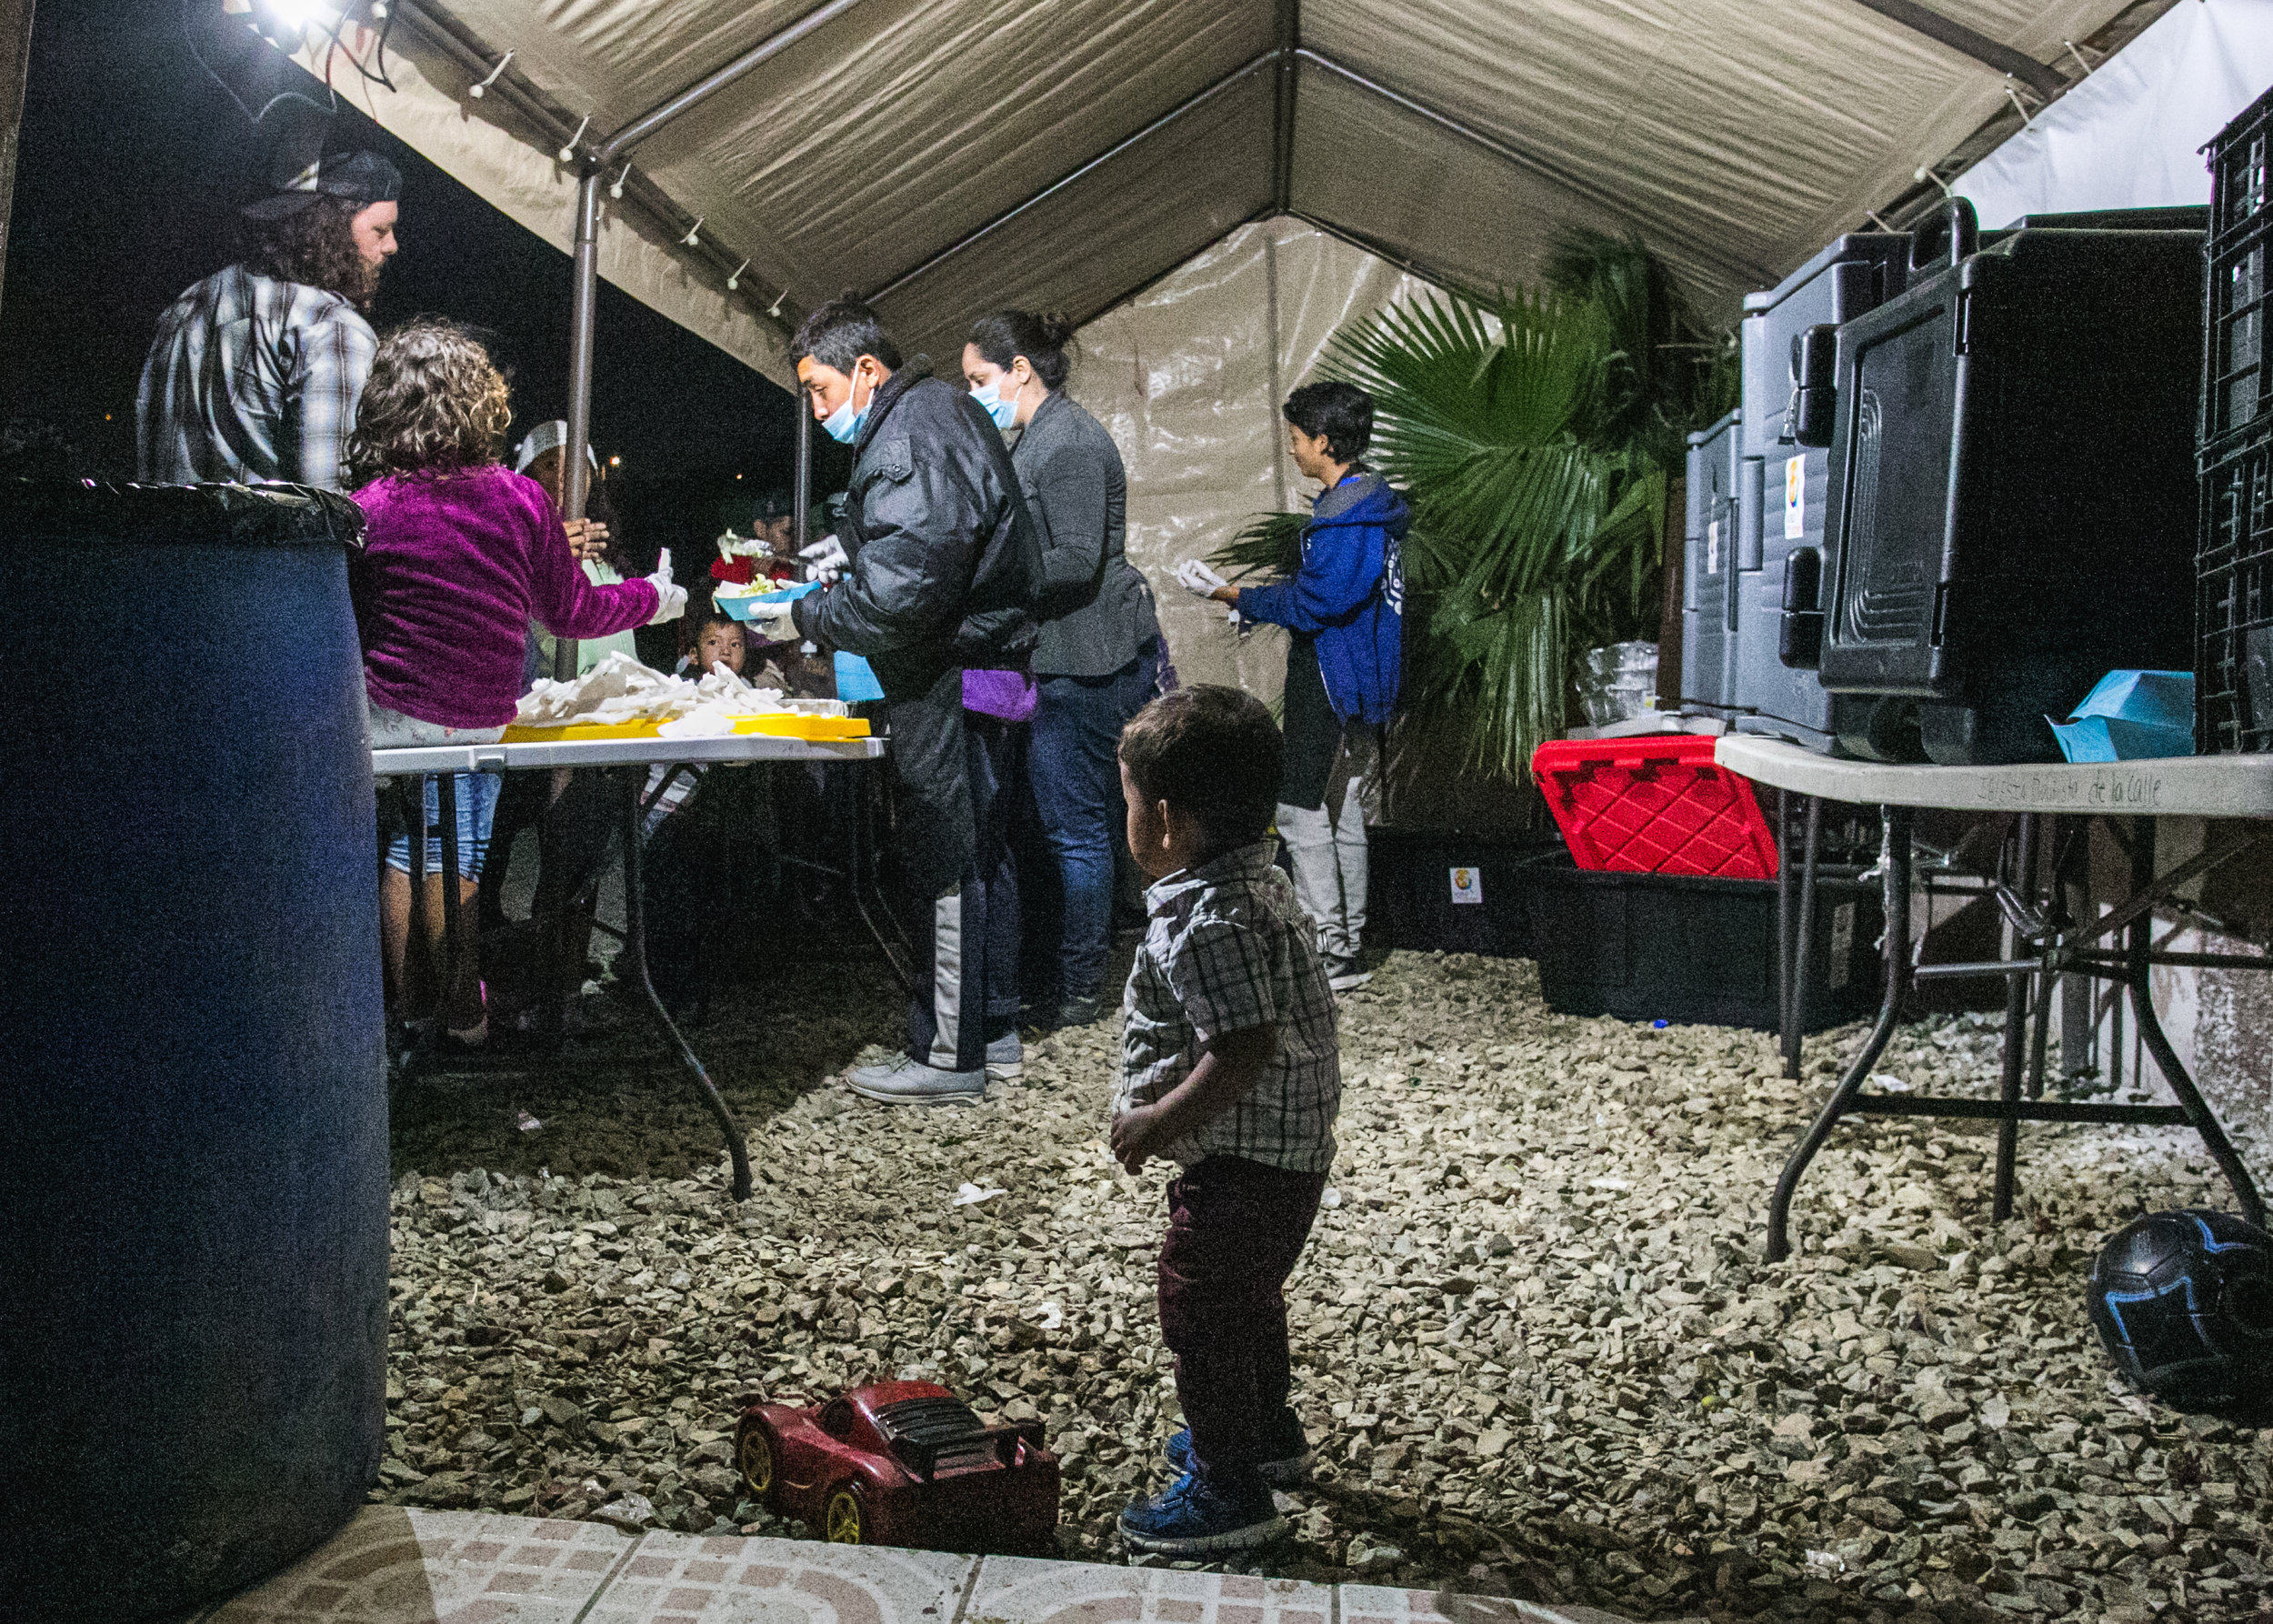  A cild watches on as volunteers from World Central Kitchen prepare dinner at the Barretal refugee camp in Tijuana, Mexico. 